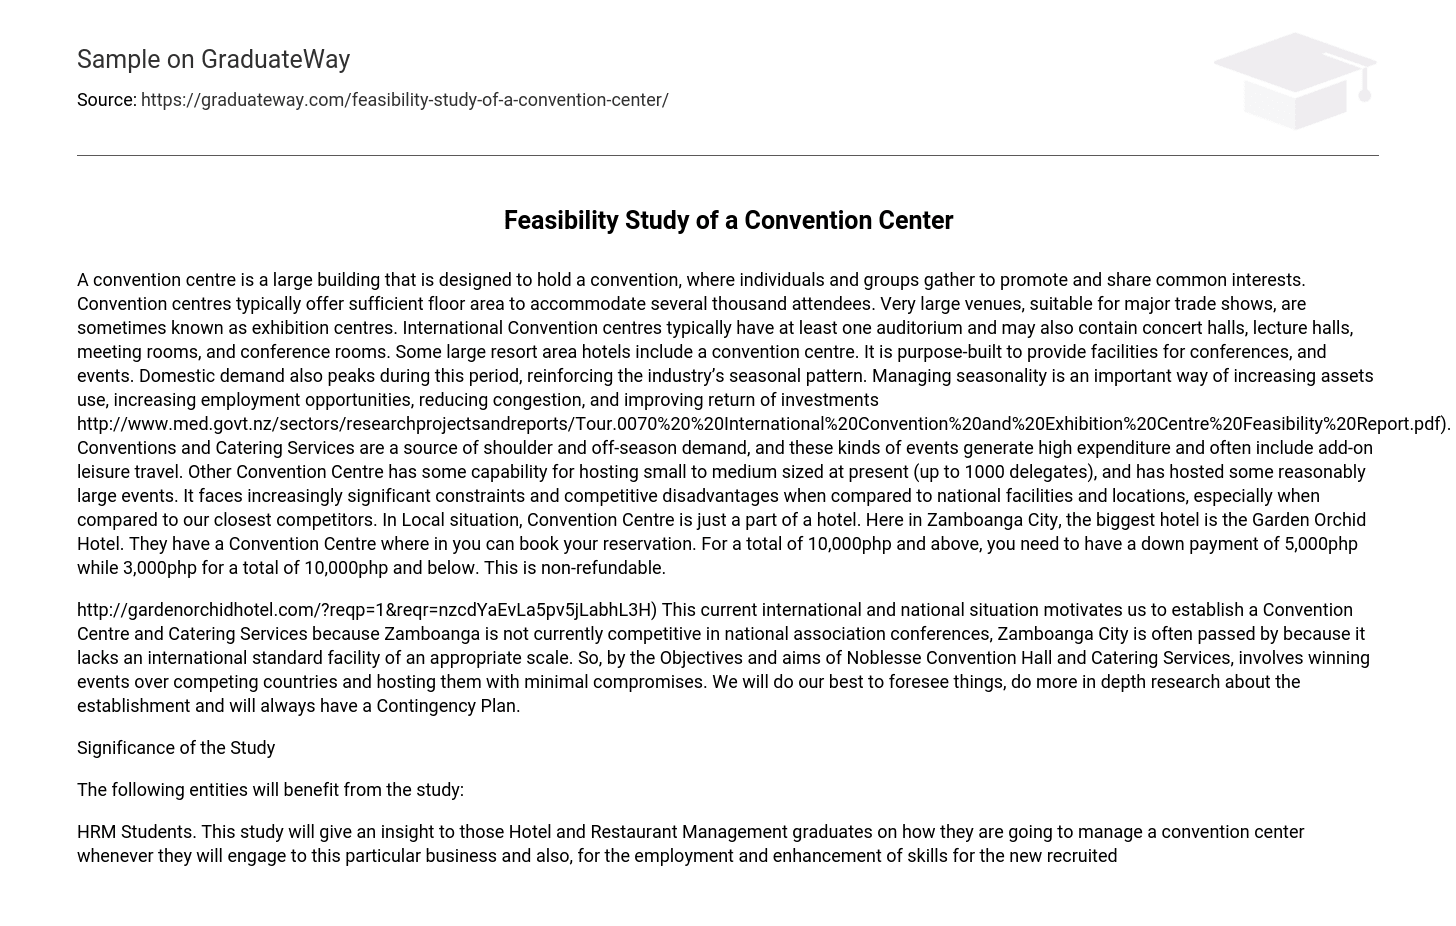 Feasibility Study of a Convention Center